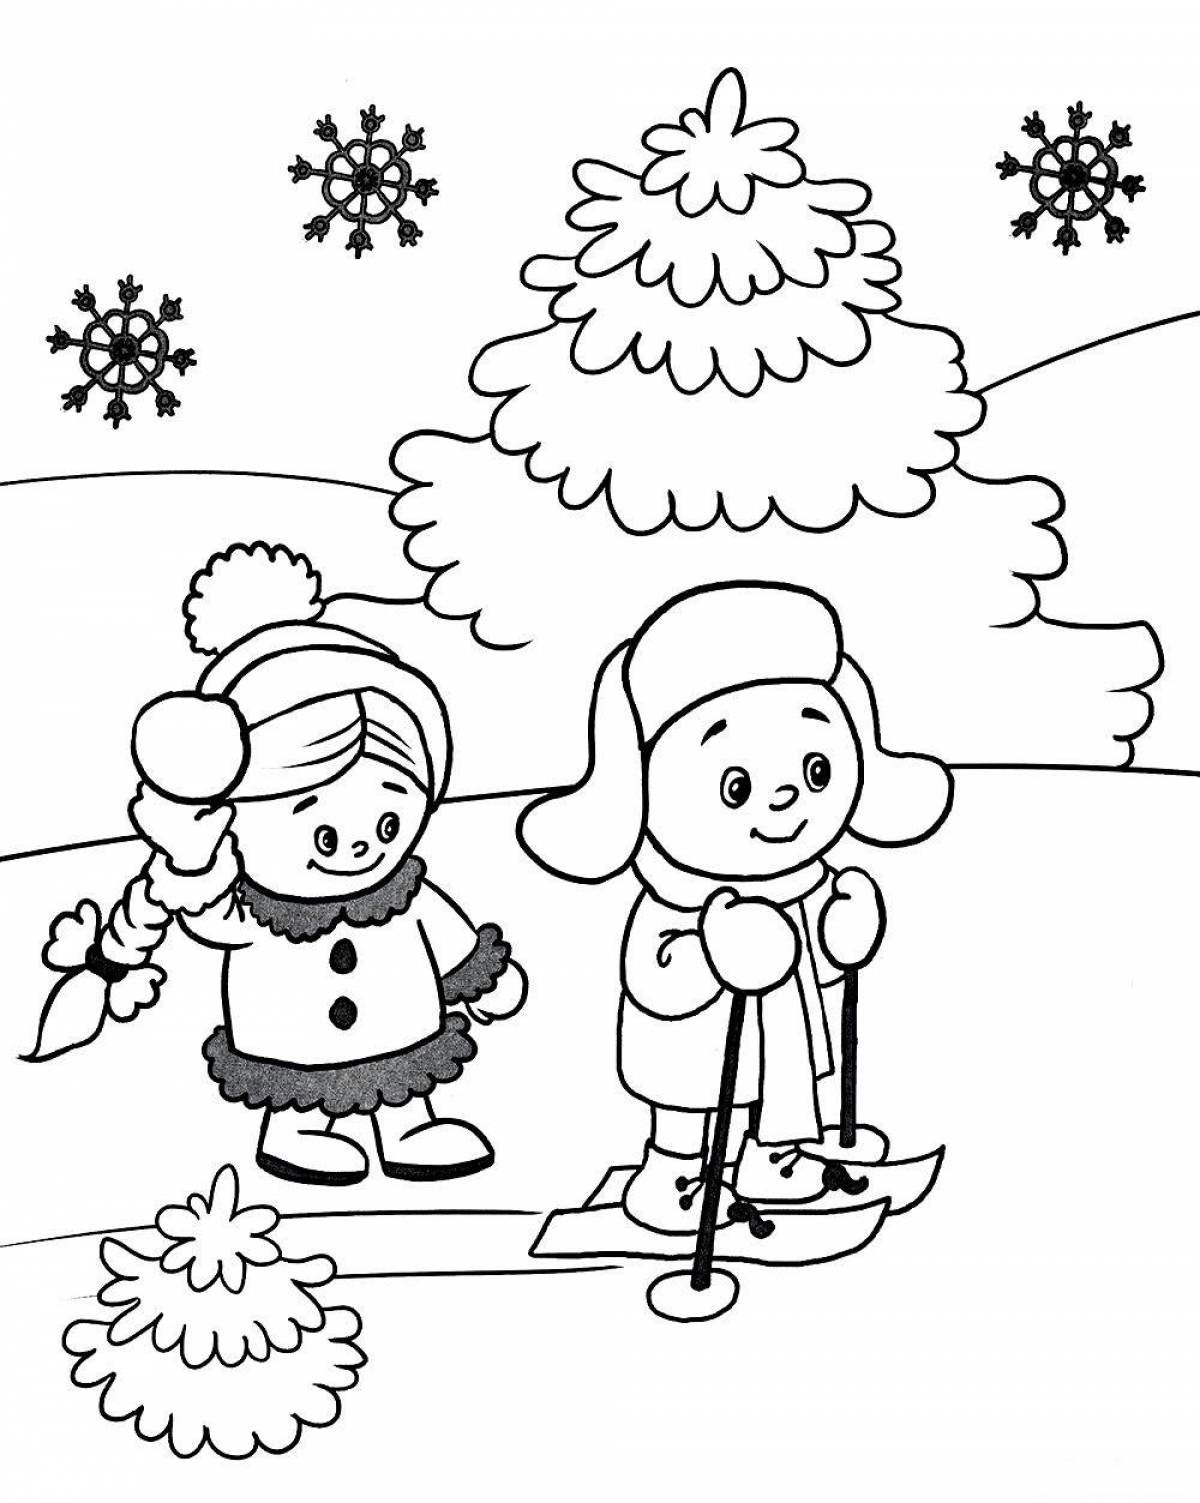 Adorable winter coloring book for kids 5-6 years old